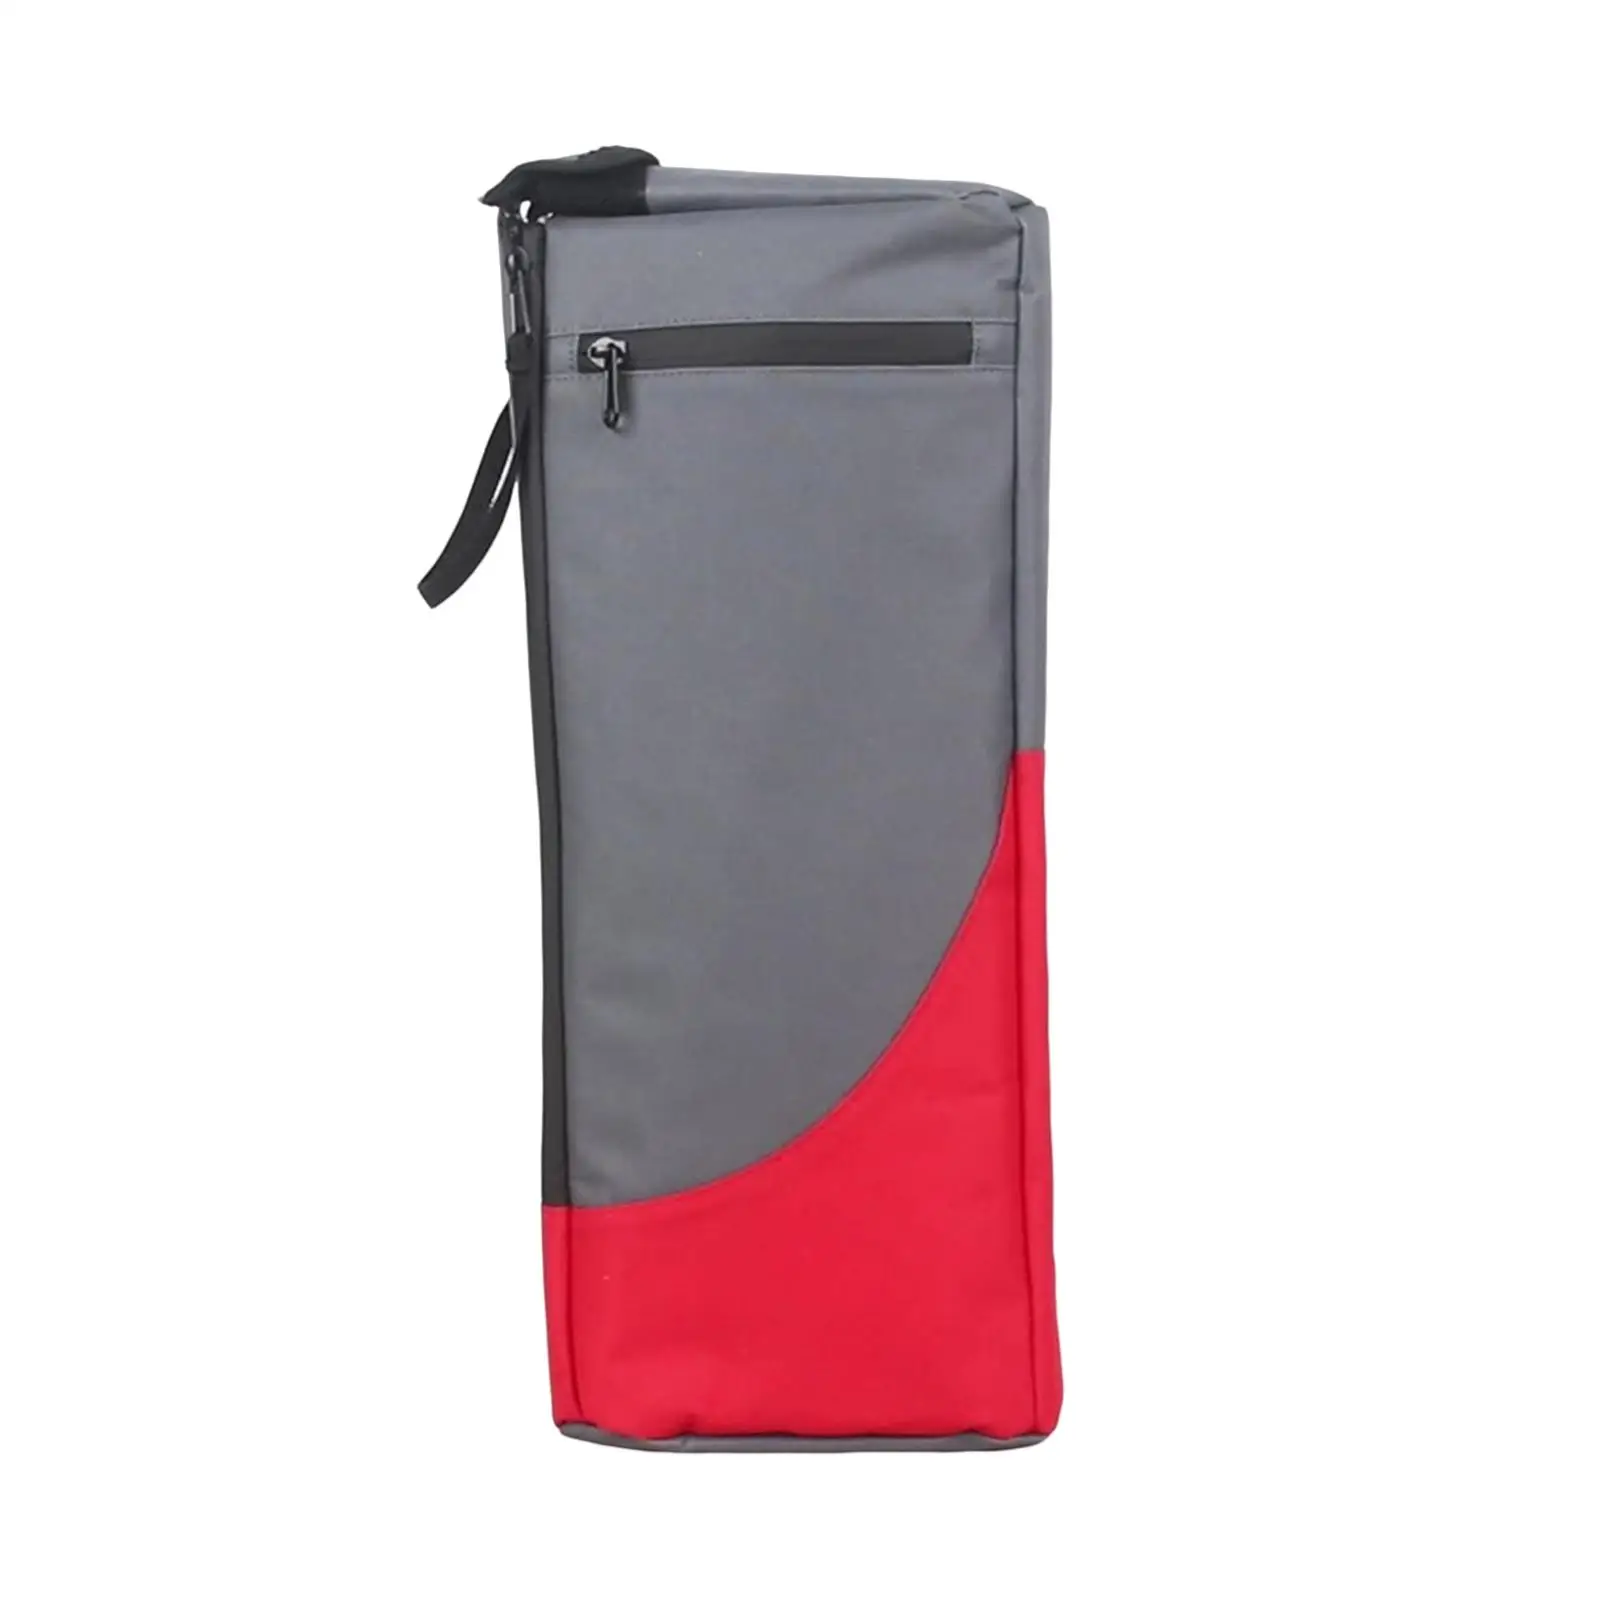 Portable Golf Cooler Bag Camping Food Traveling Pouch Outdoor Hiking Box Carrier Thermal Insulated Bag Keeps Drinks Cool